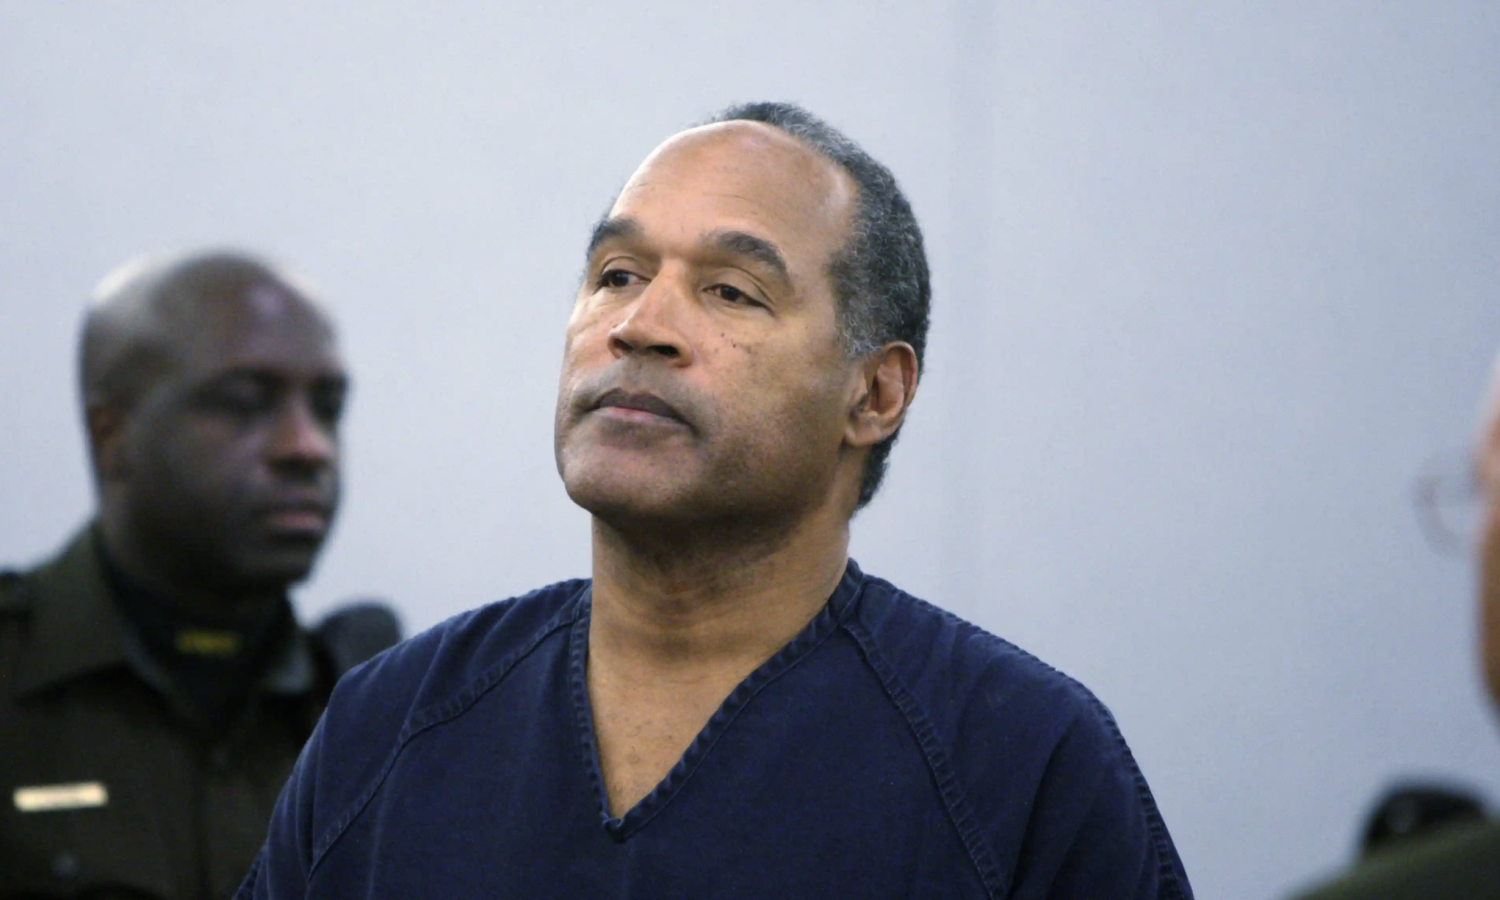 OJ Simpson pictured in 2008. He was sentenced to 33 years in prison in a robbery case in Las Vegas involving sporting memorabilia. Photograph: Isaac Brekken/AFP/Getty Images